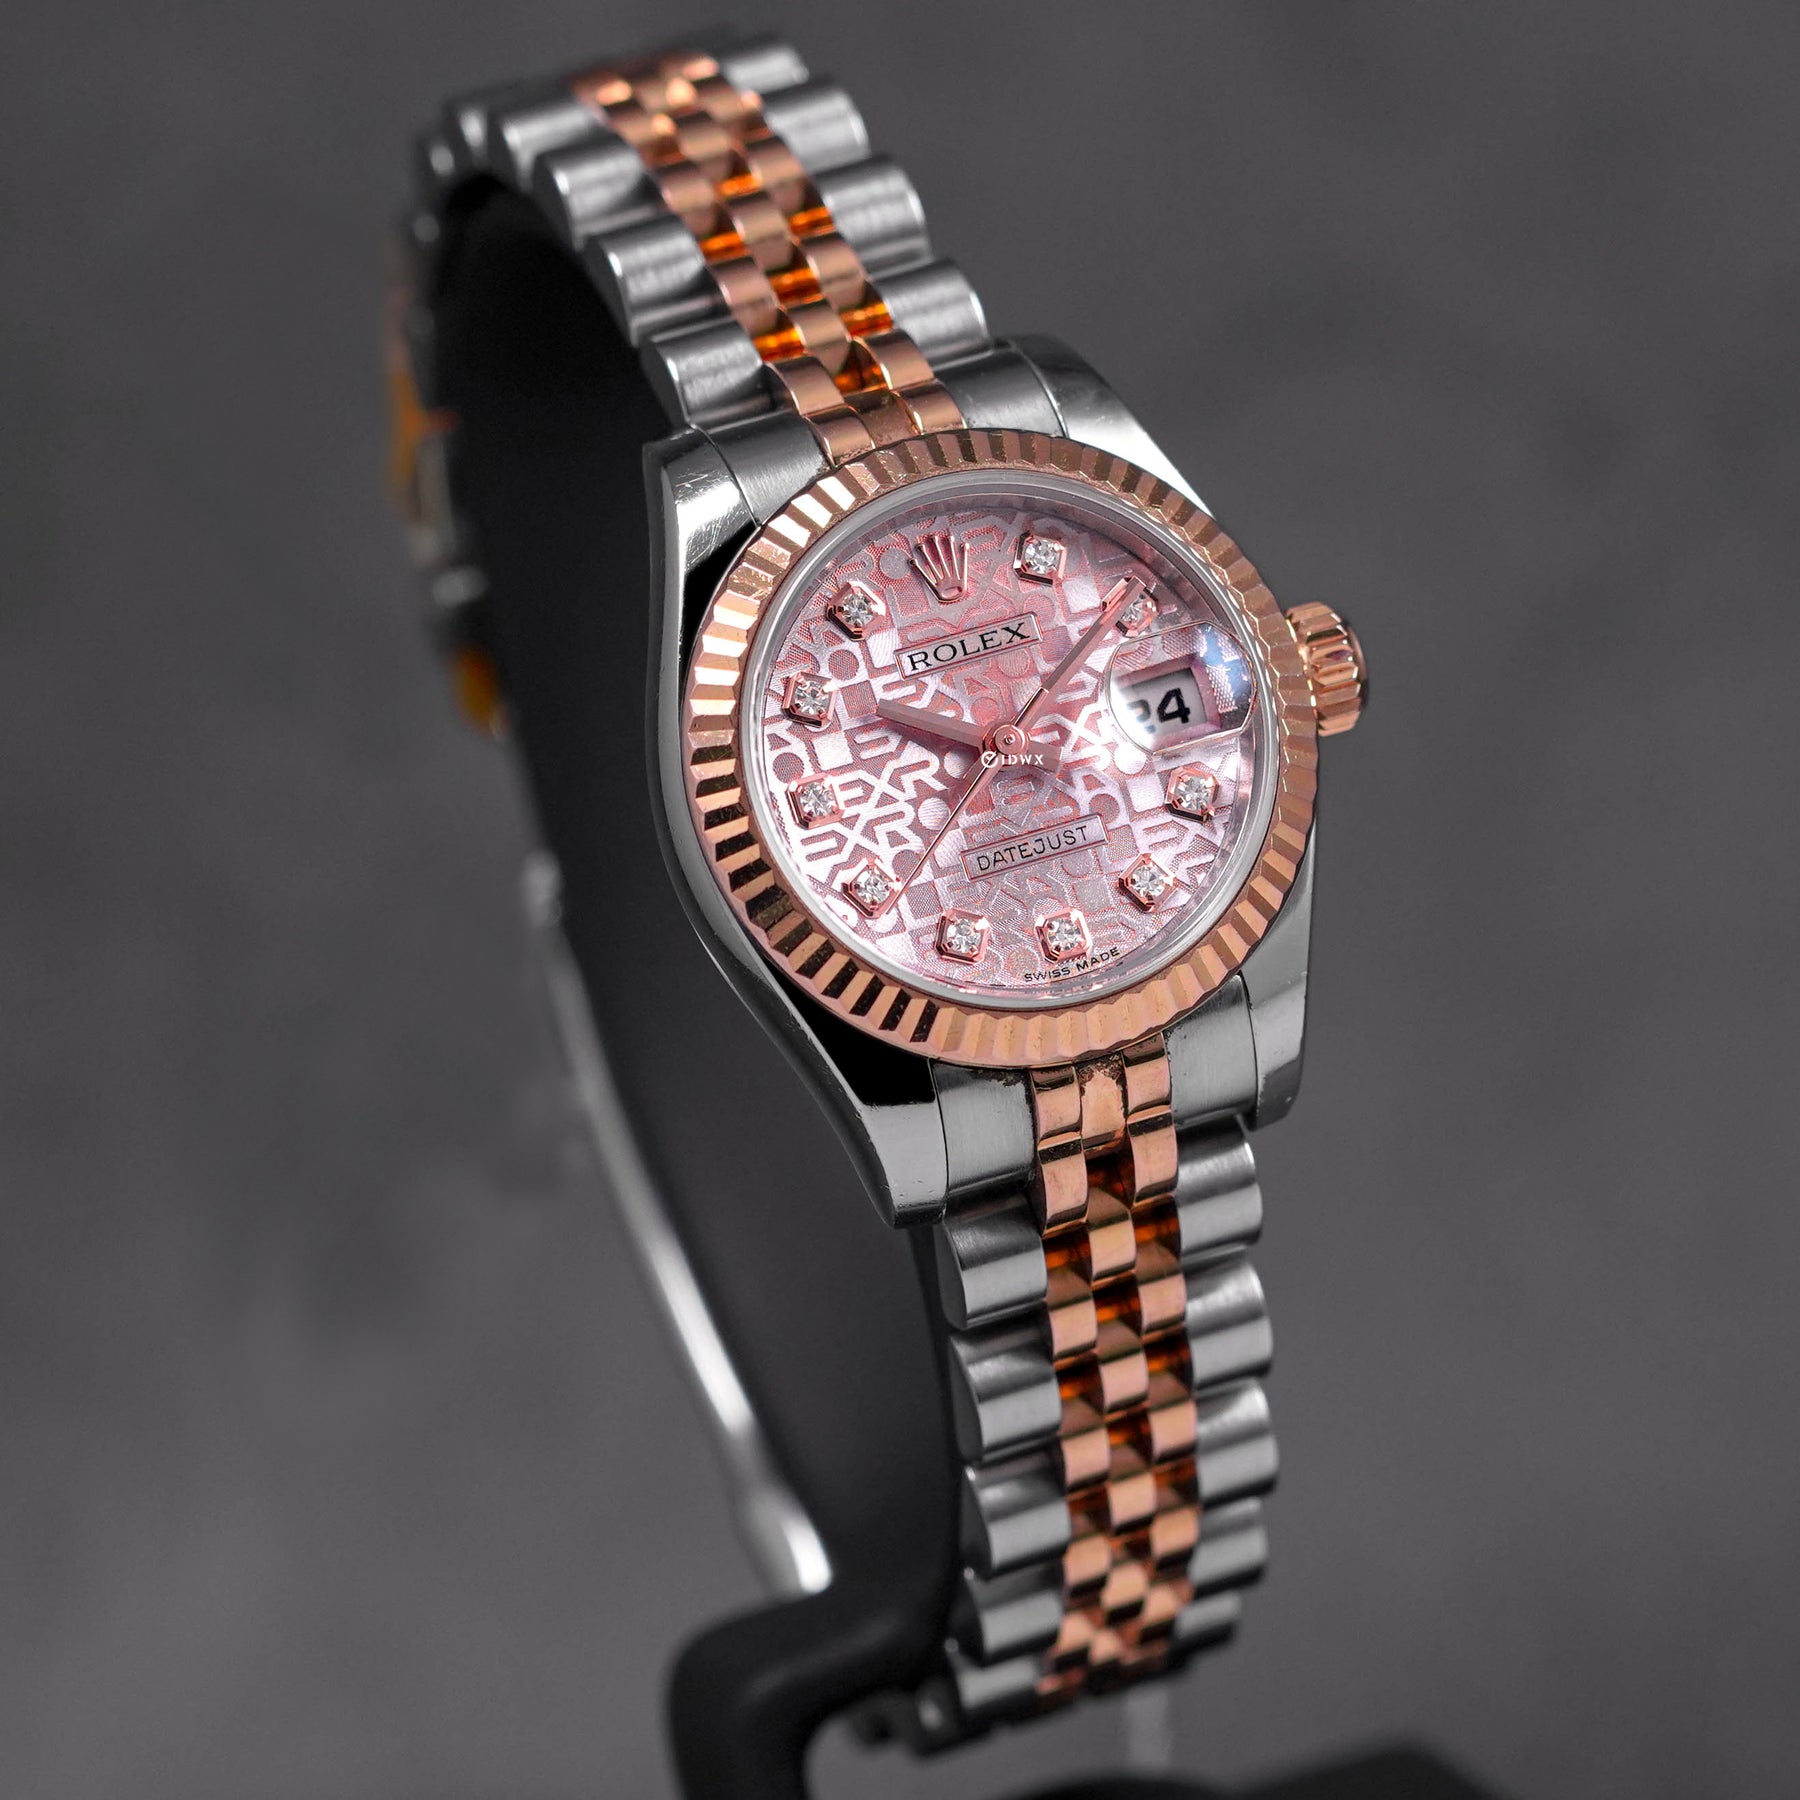 DATEJUST 26MM TWOTONE ROSEGOLD PINK COMPUTERIZED DIAMOND DIAL (2011)